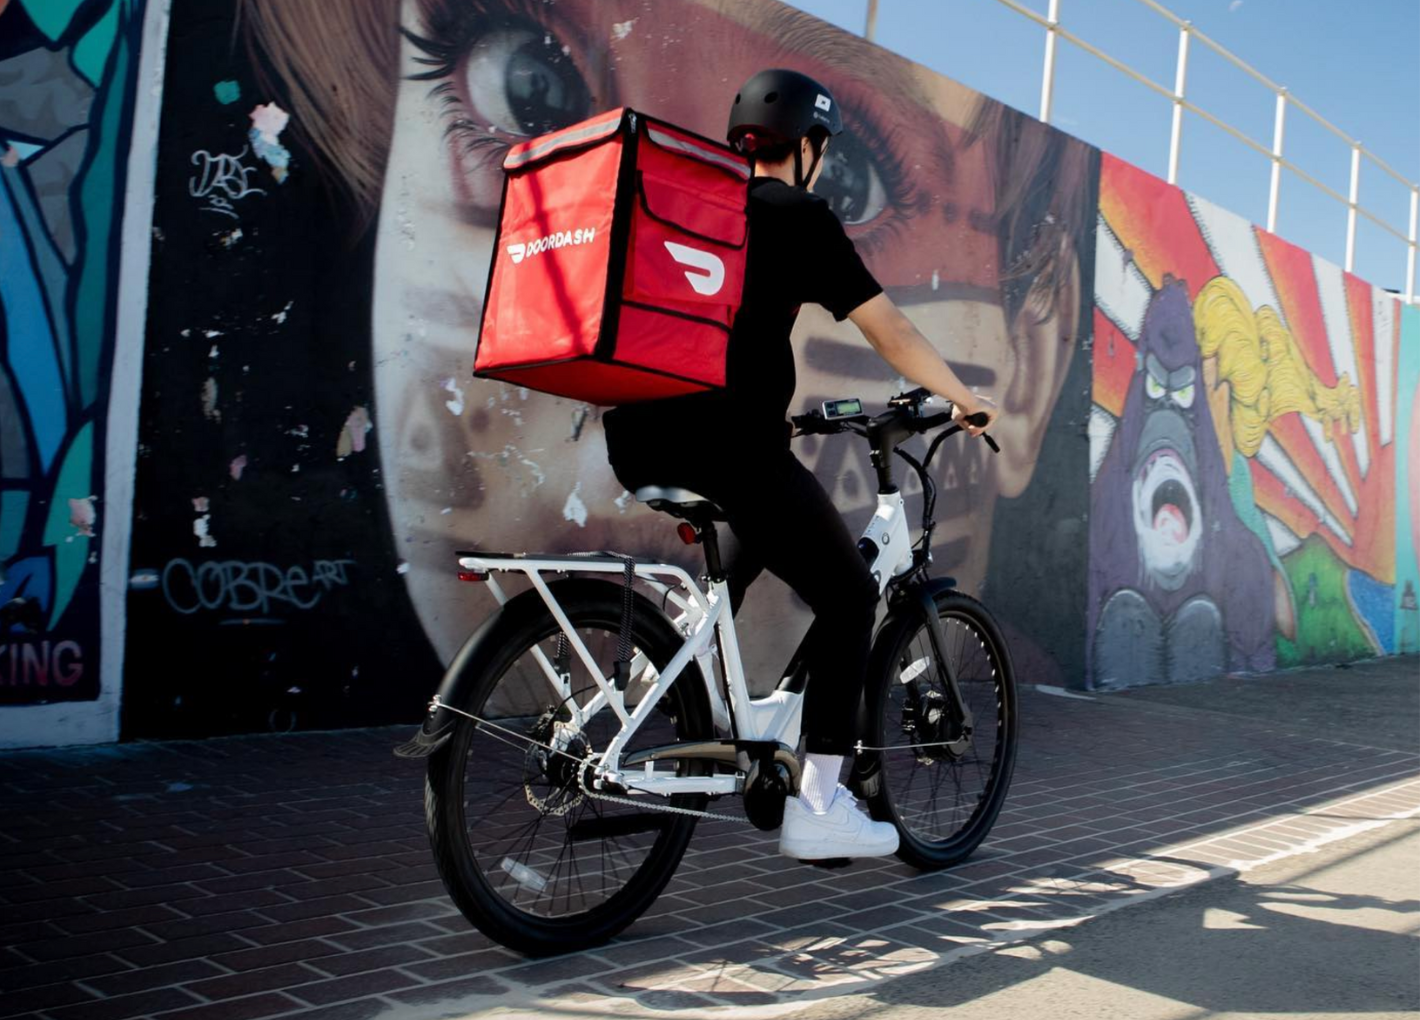 DoorDash's Third Annual Summer of DashPass is Winding Down Canada Takeout